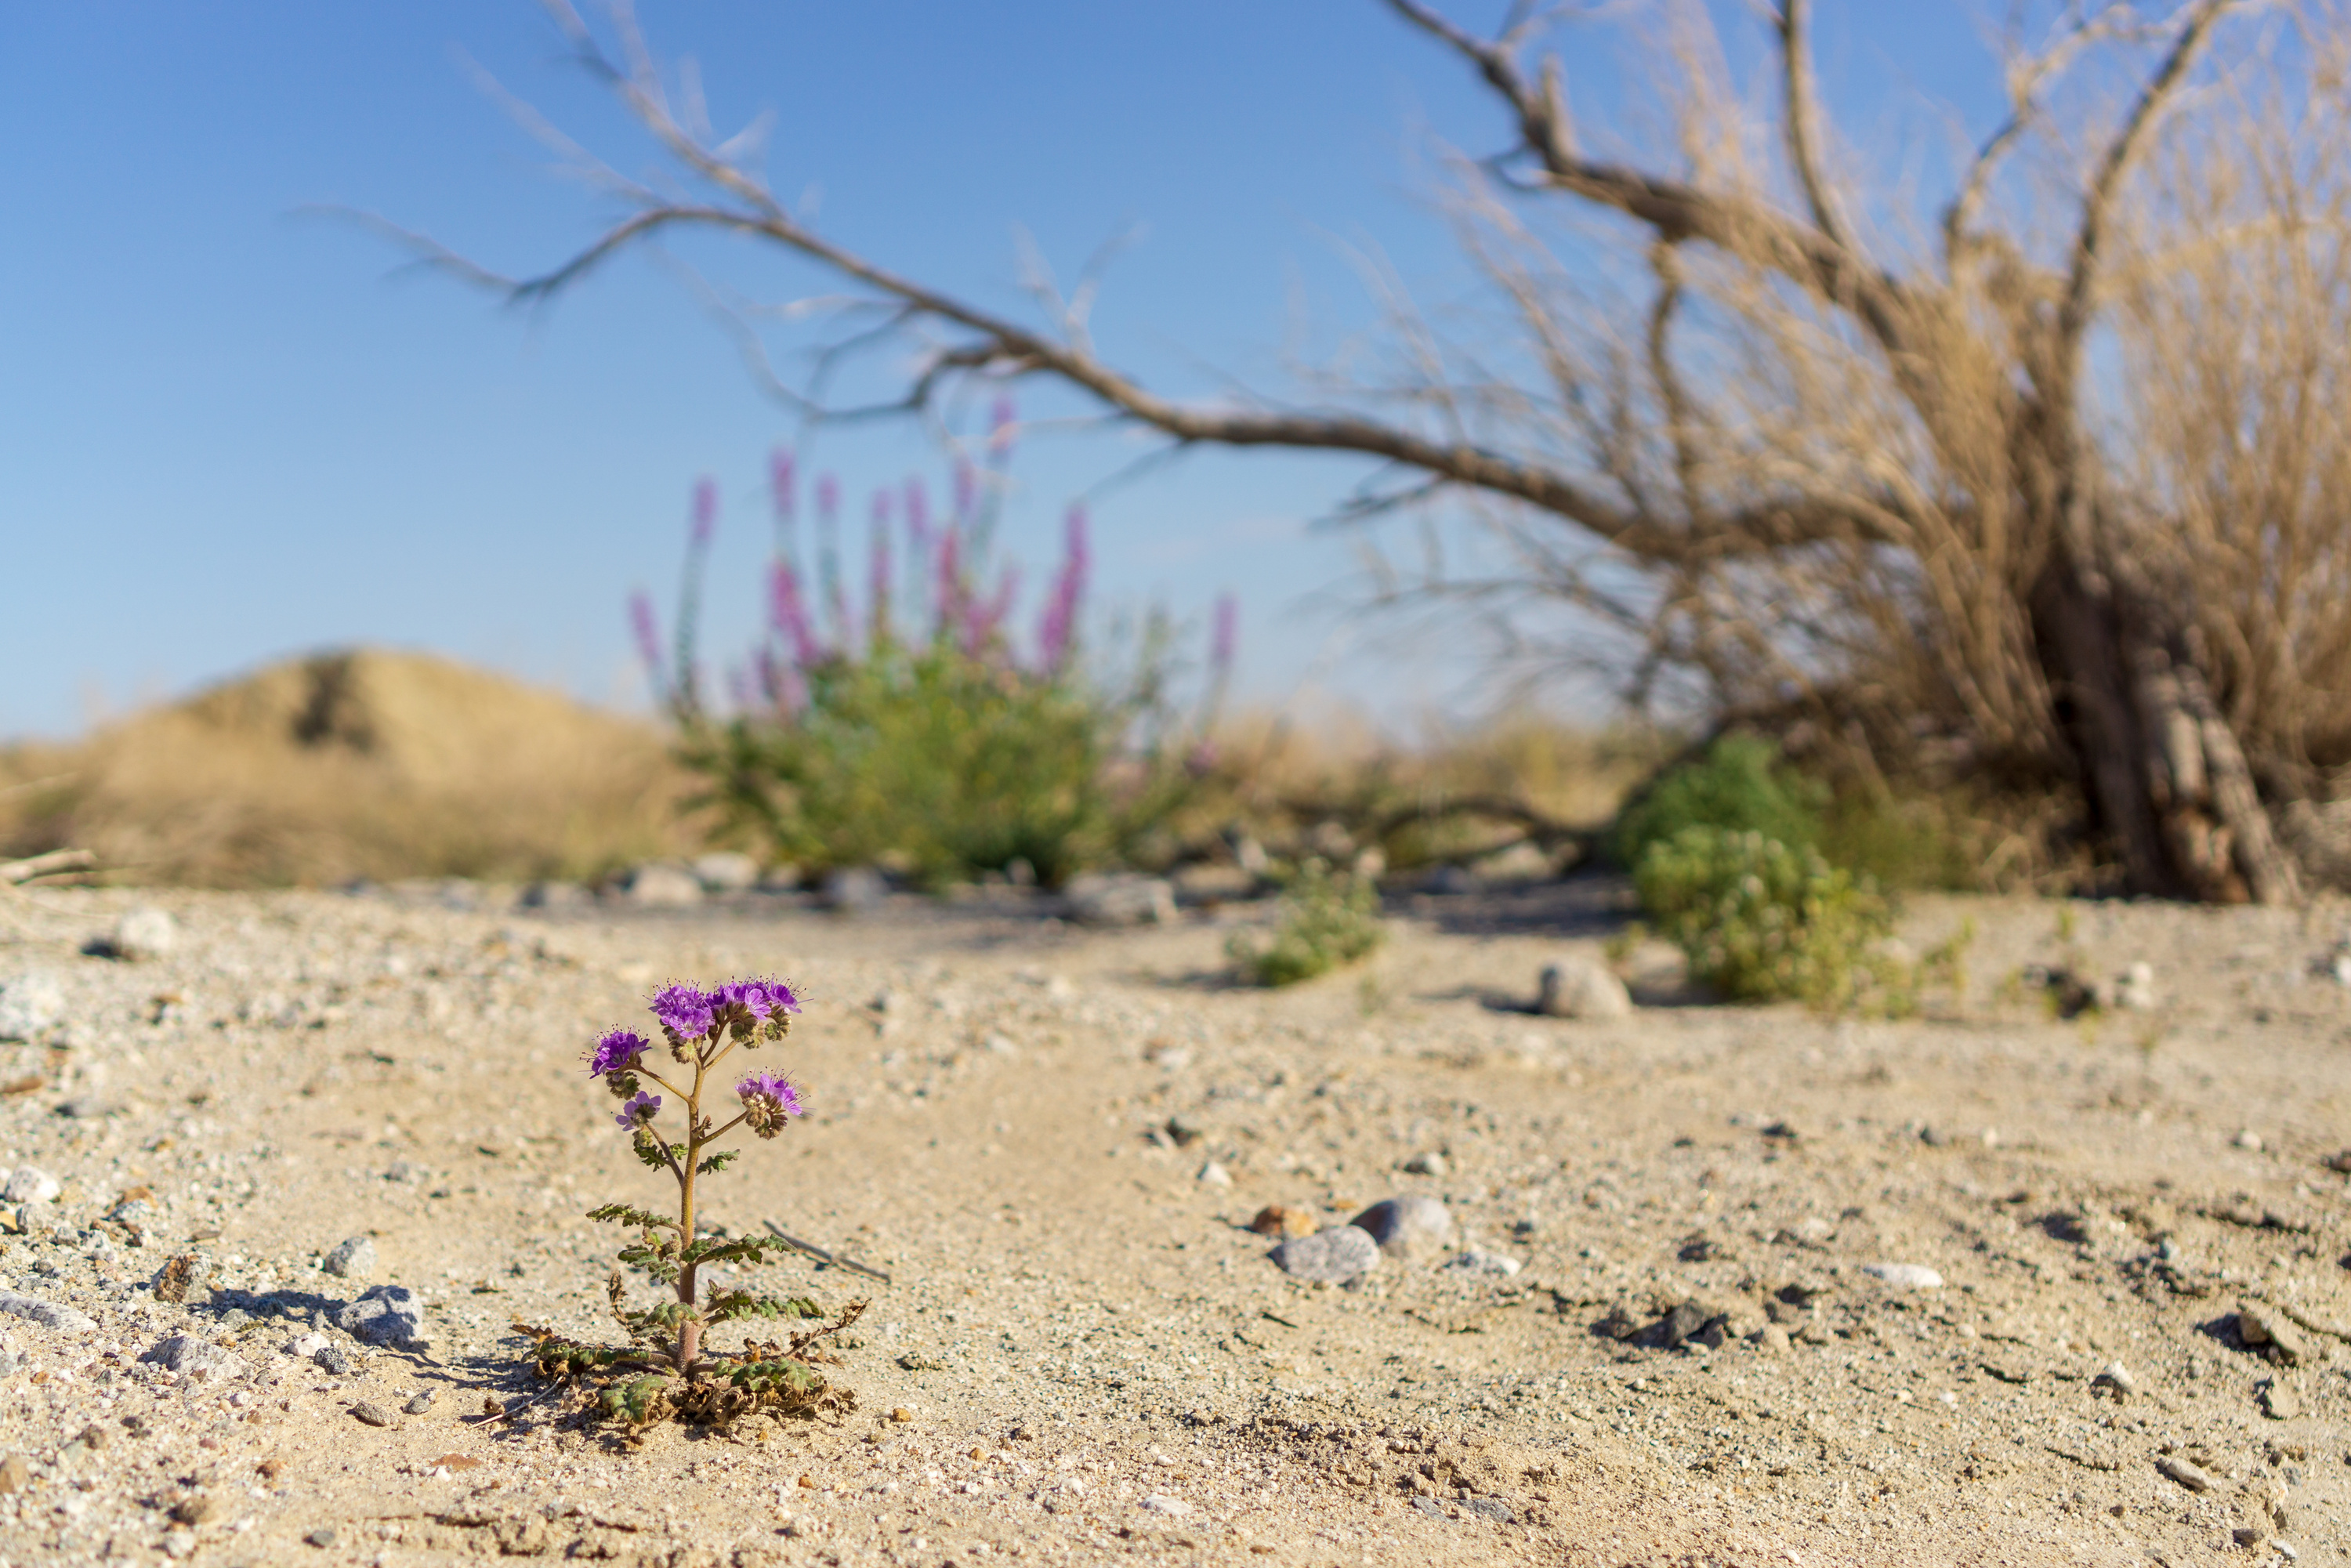 A small purple flower grows in the middle of the desert.